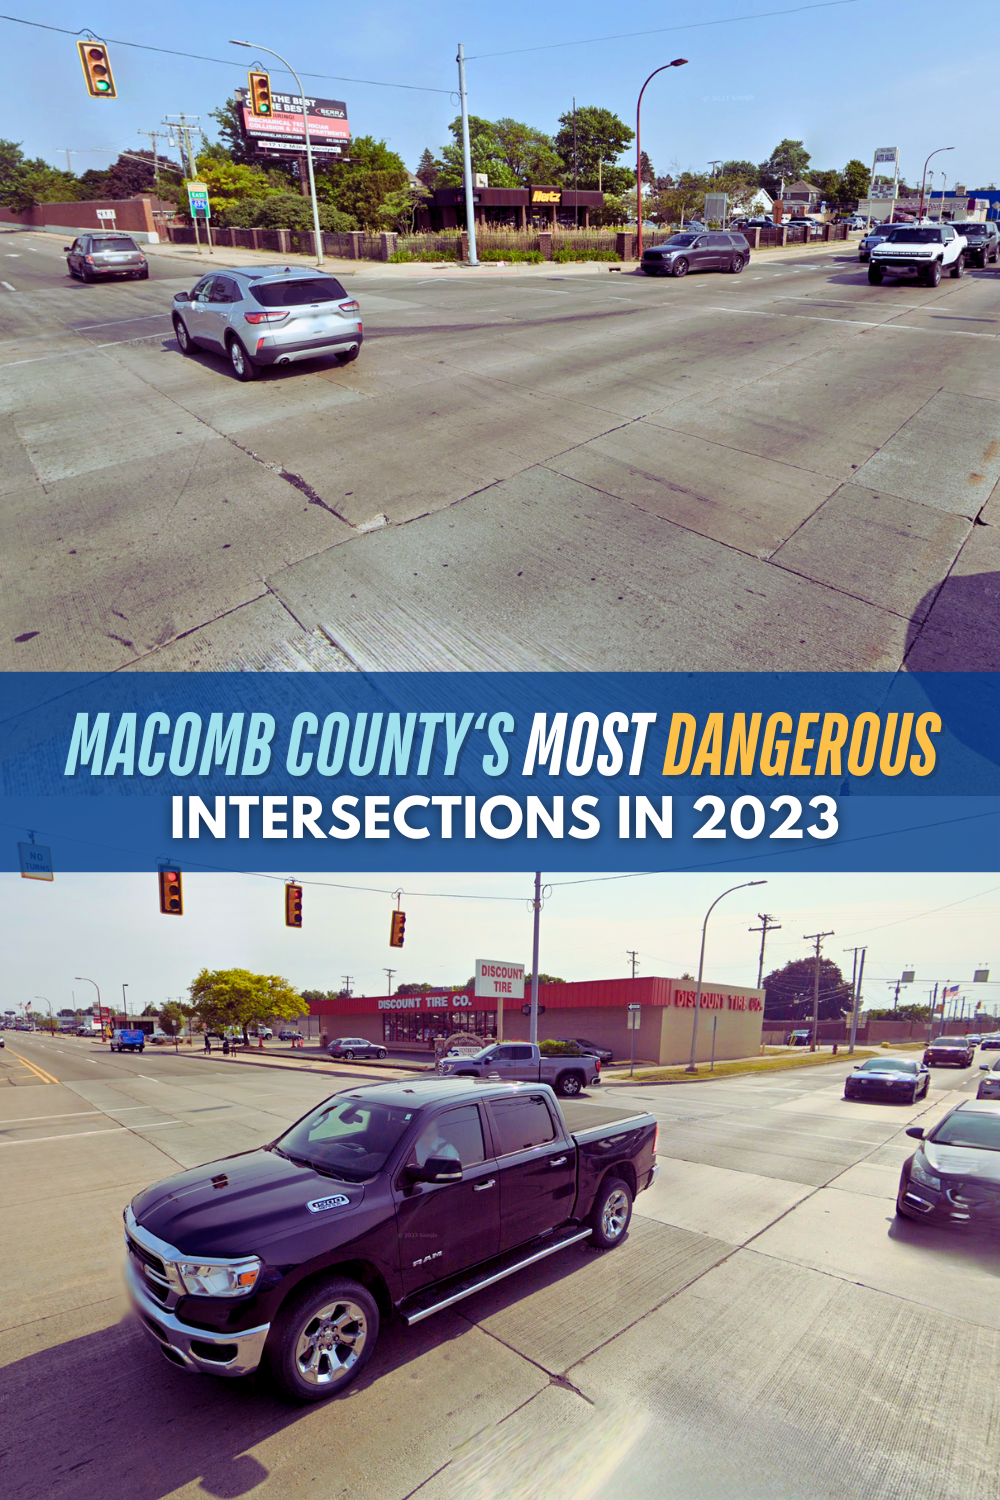 Macomb County’s Most Dangerous Intersections in 2023